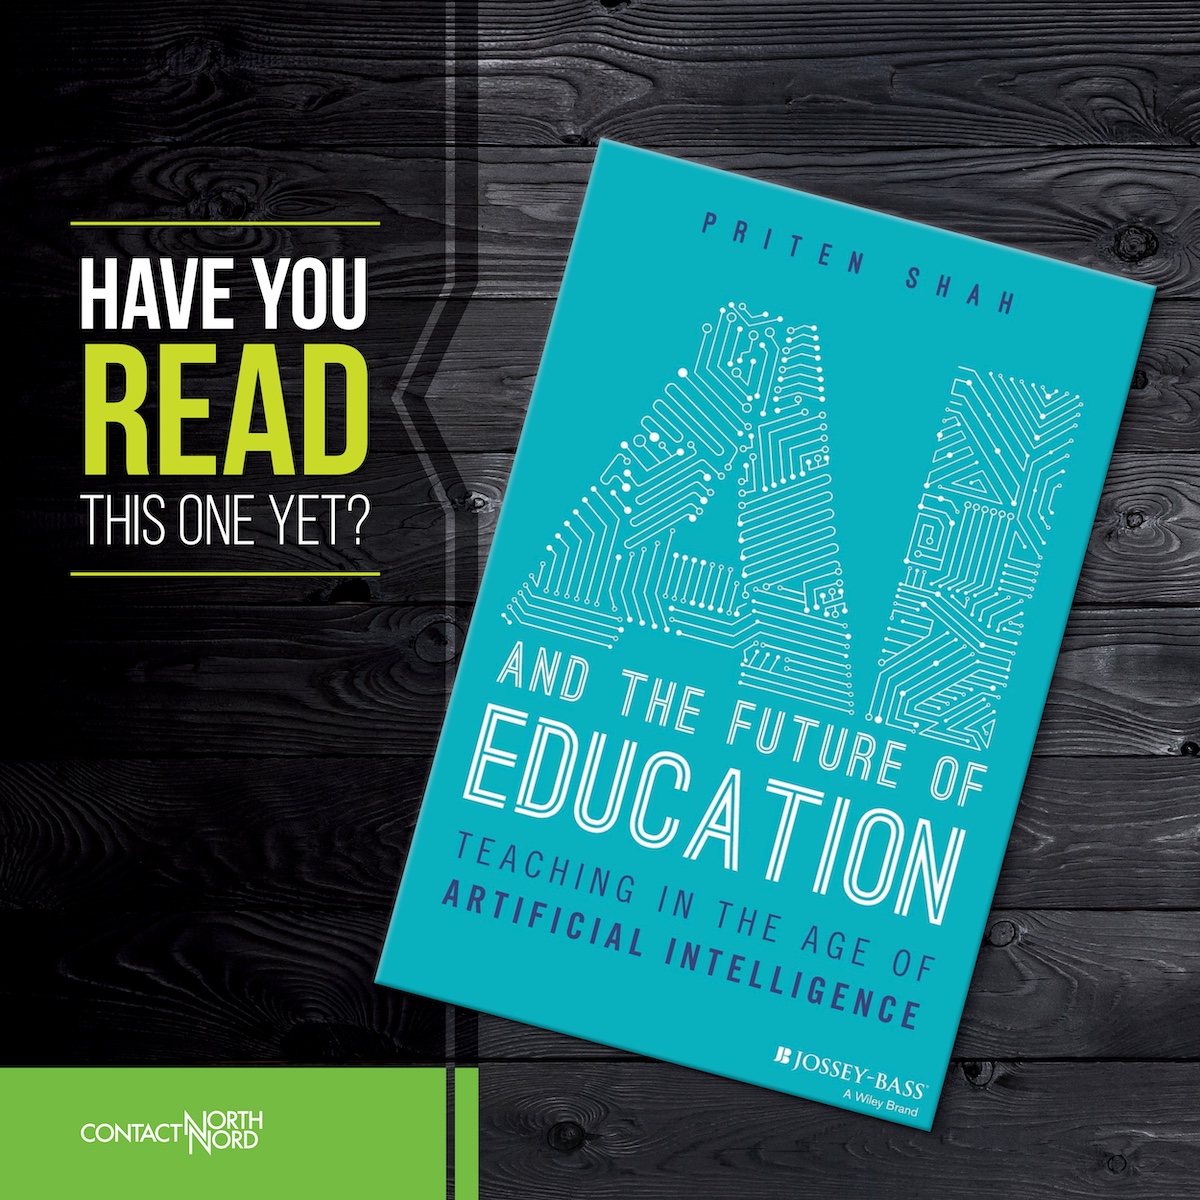 📘 Priten Shah's free PDF offers an insightful look into how #AI is reshaping education. From teaching to assessment, it addresses the crucial aspects of AI, including ethics & access. A timely resource as AI apps like ChatGPT grow! 👉 ow.ly/9rIq50R9htb #EdTech @WileyVCH